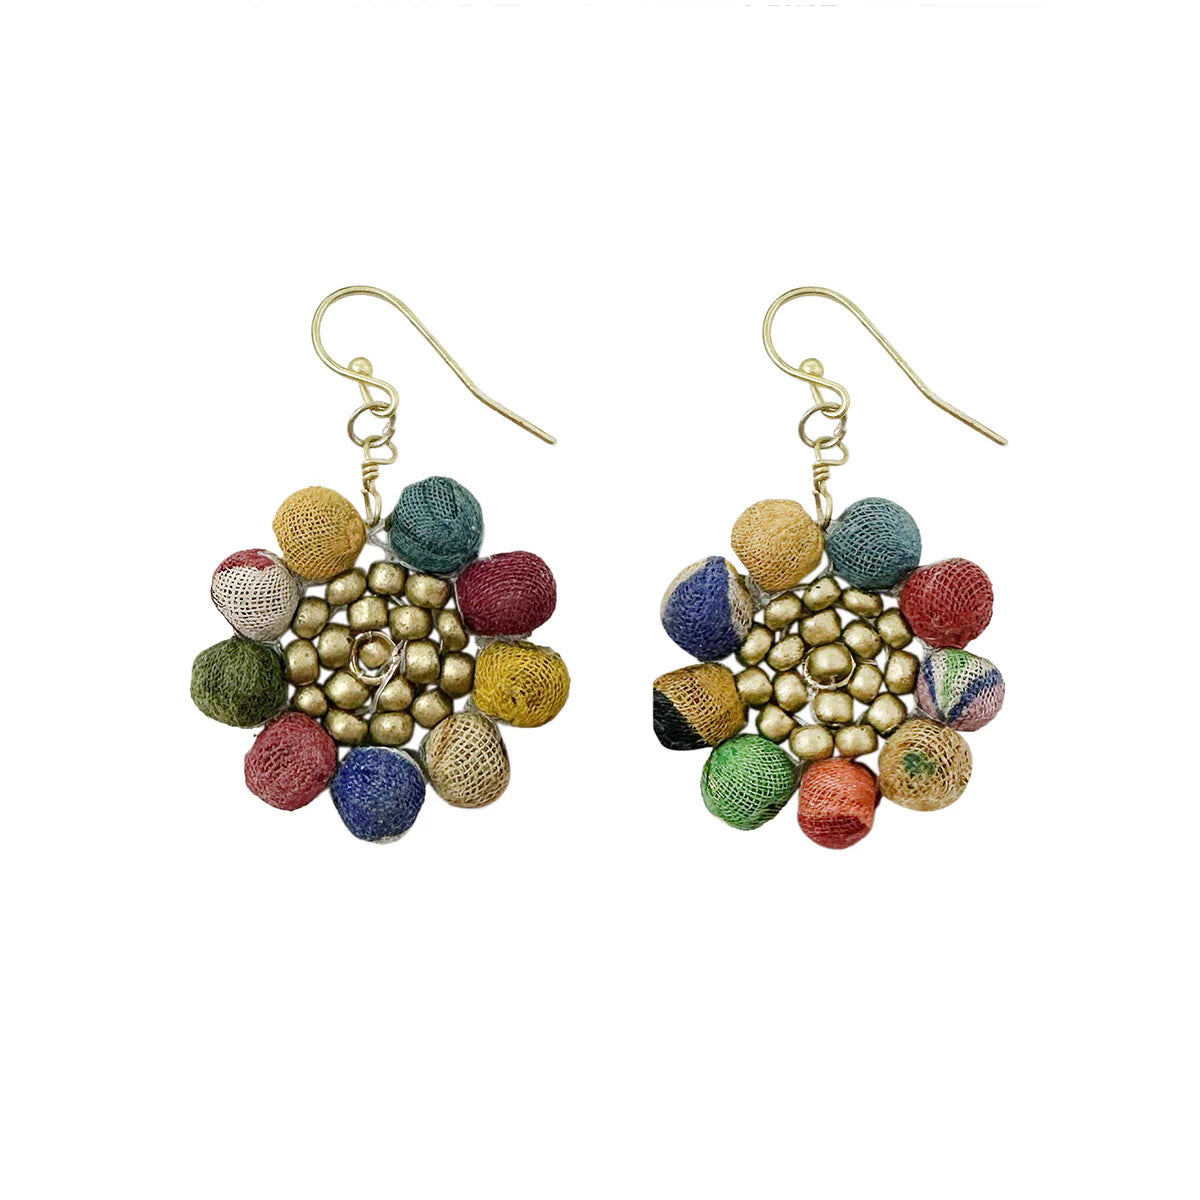 Angelco Accessories Sunny flower kantha earrings in flat-lay on white background